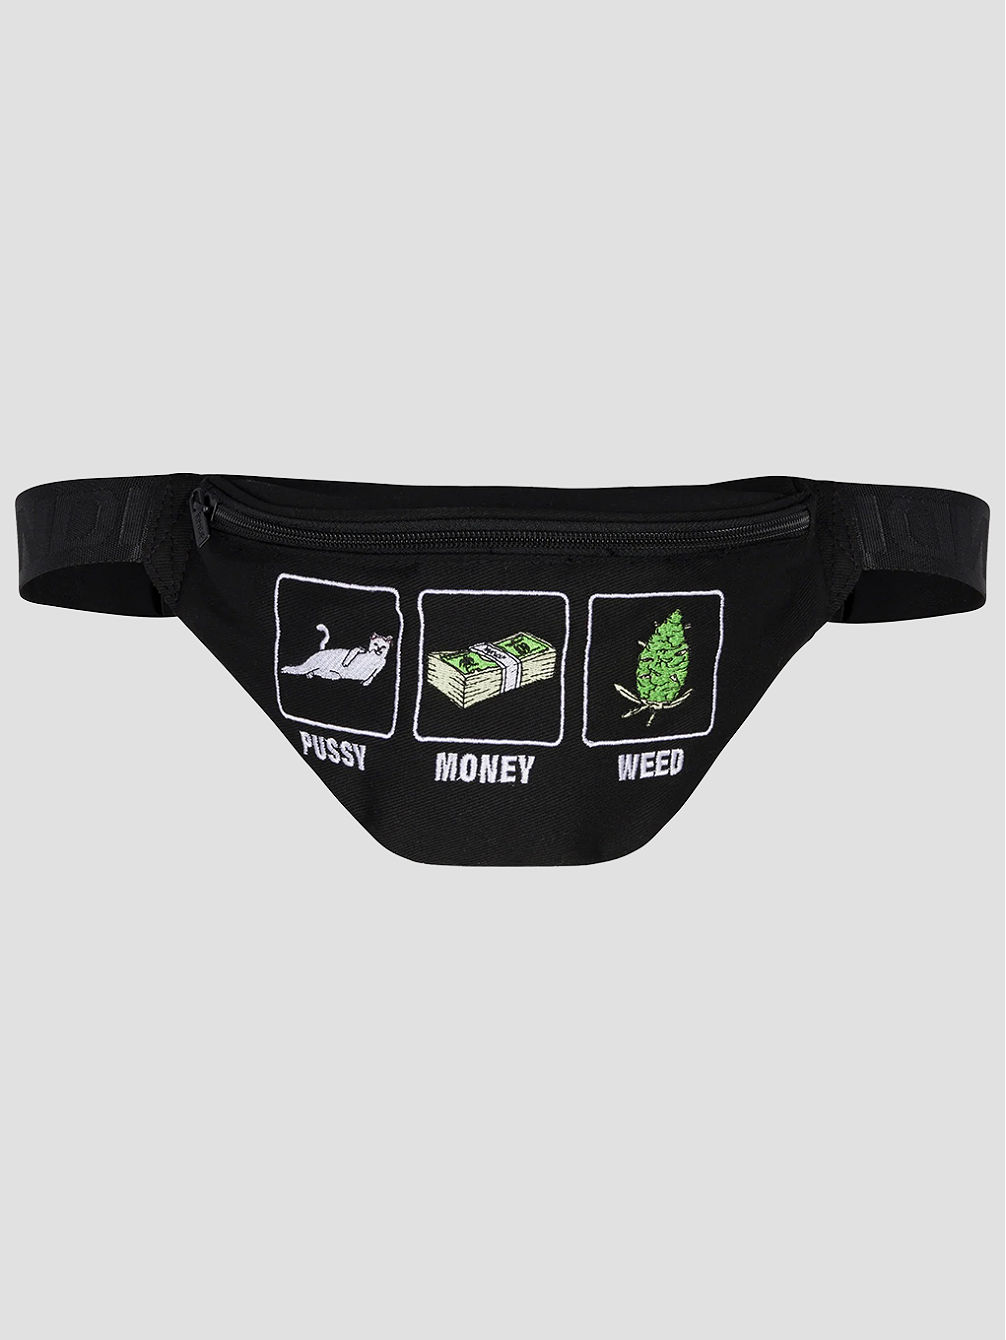 Pussy, Money, Weed Fanny Pack Bag